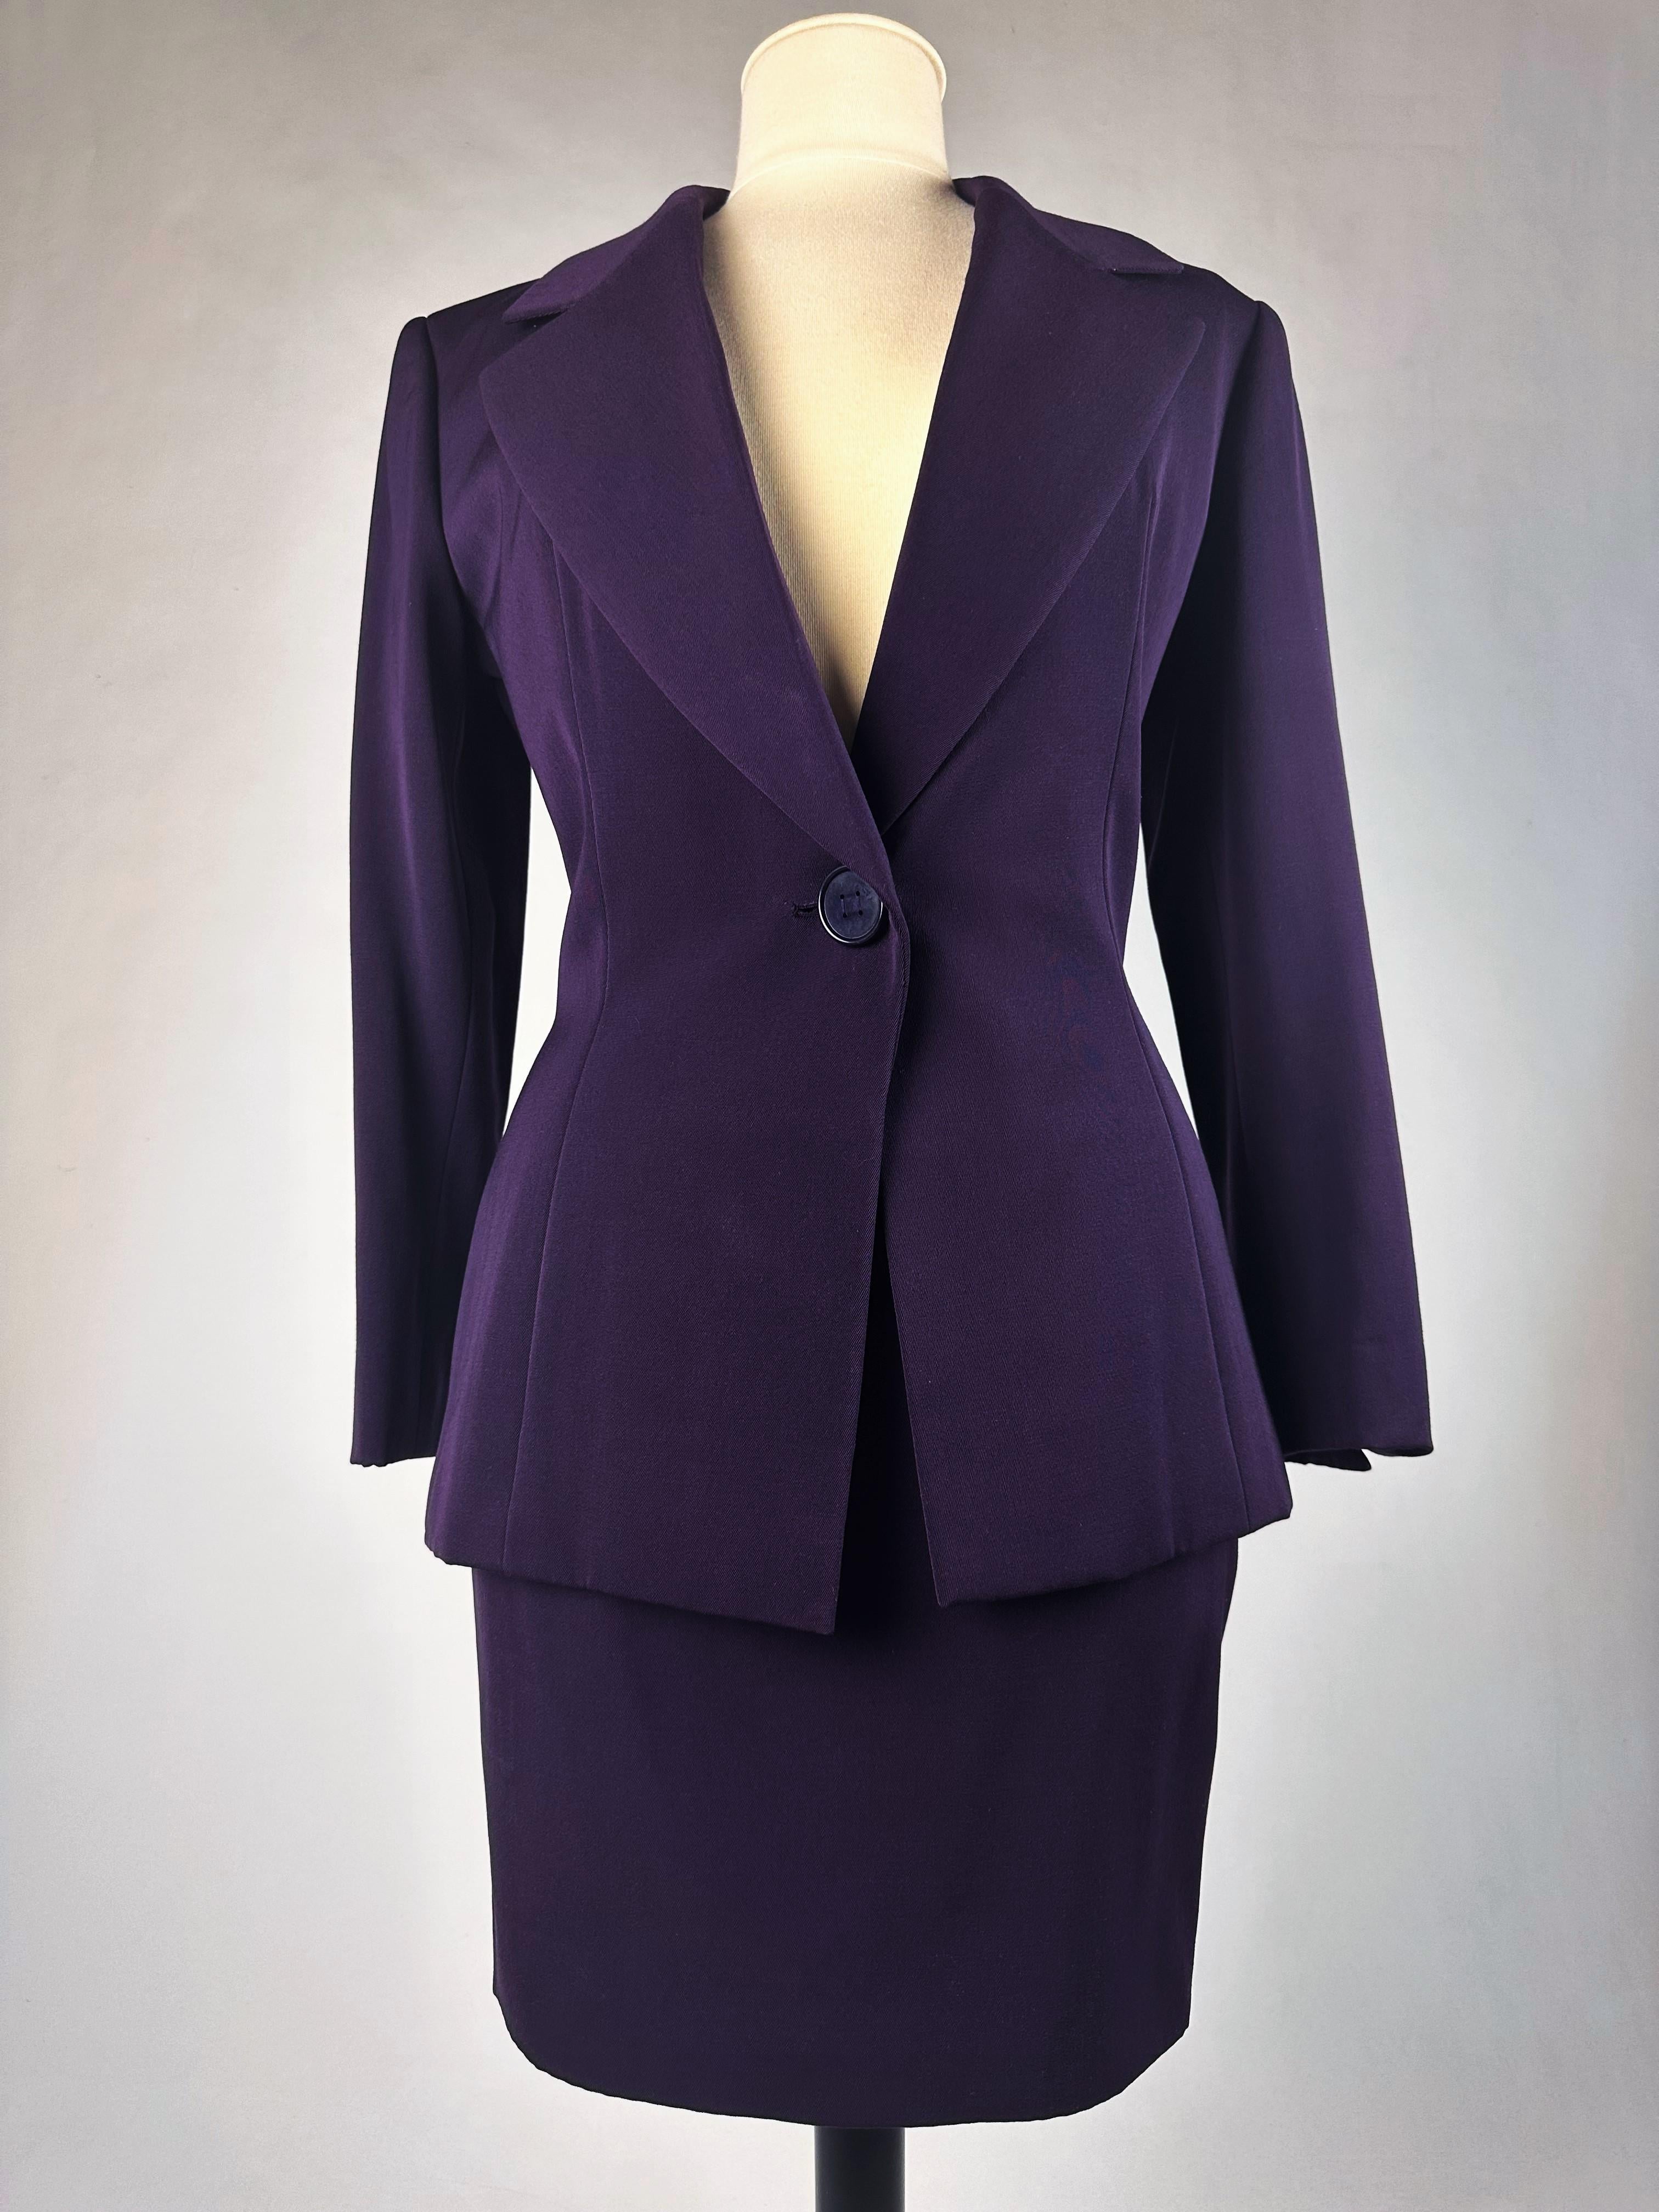 Women's Skirt suit by Gianfranco Ferré for Christian Dior Haute Couture Circa 1995 For Sale